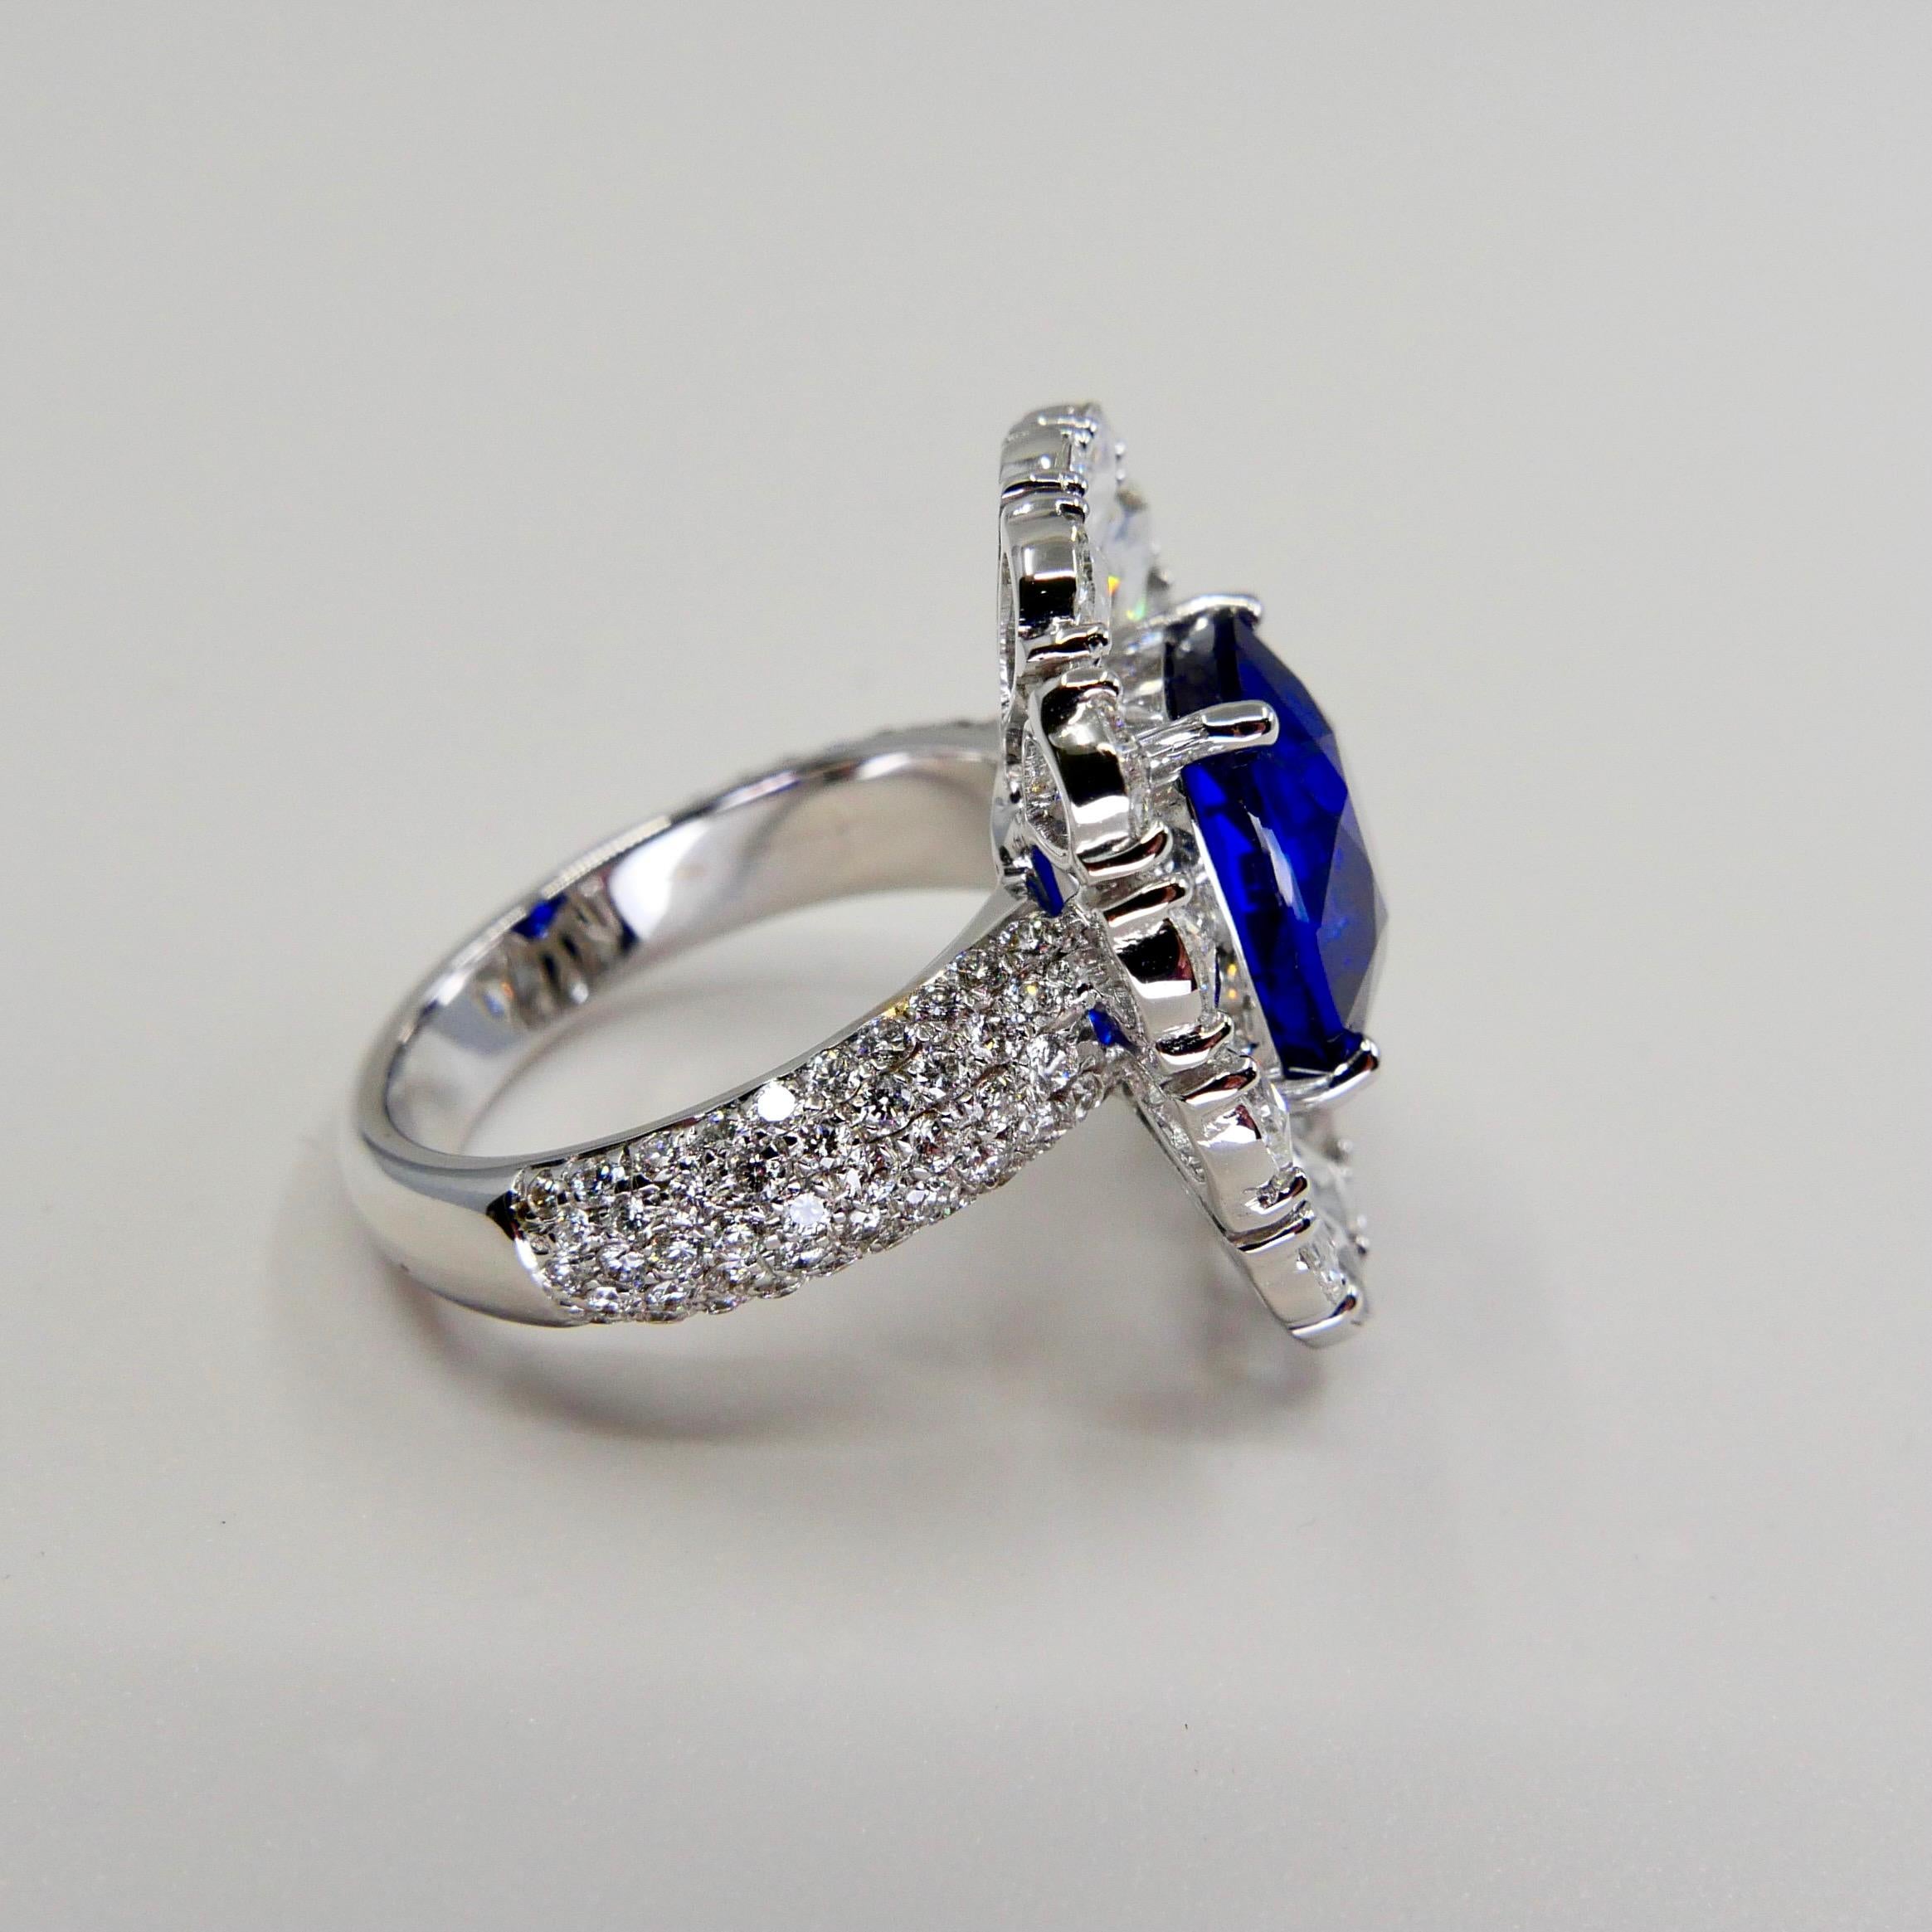 Certified 6 Carat Ceylon Royal Blue Sapphire and Rose Cut Diamond Cocktail Ring 5